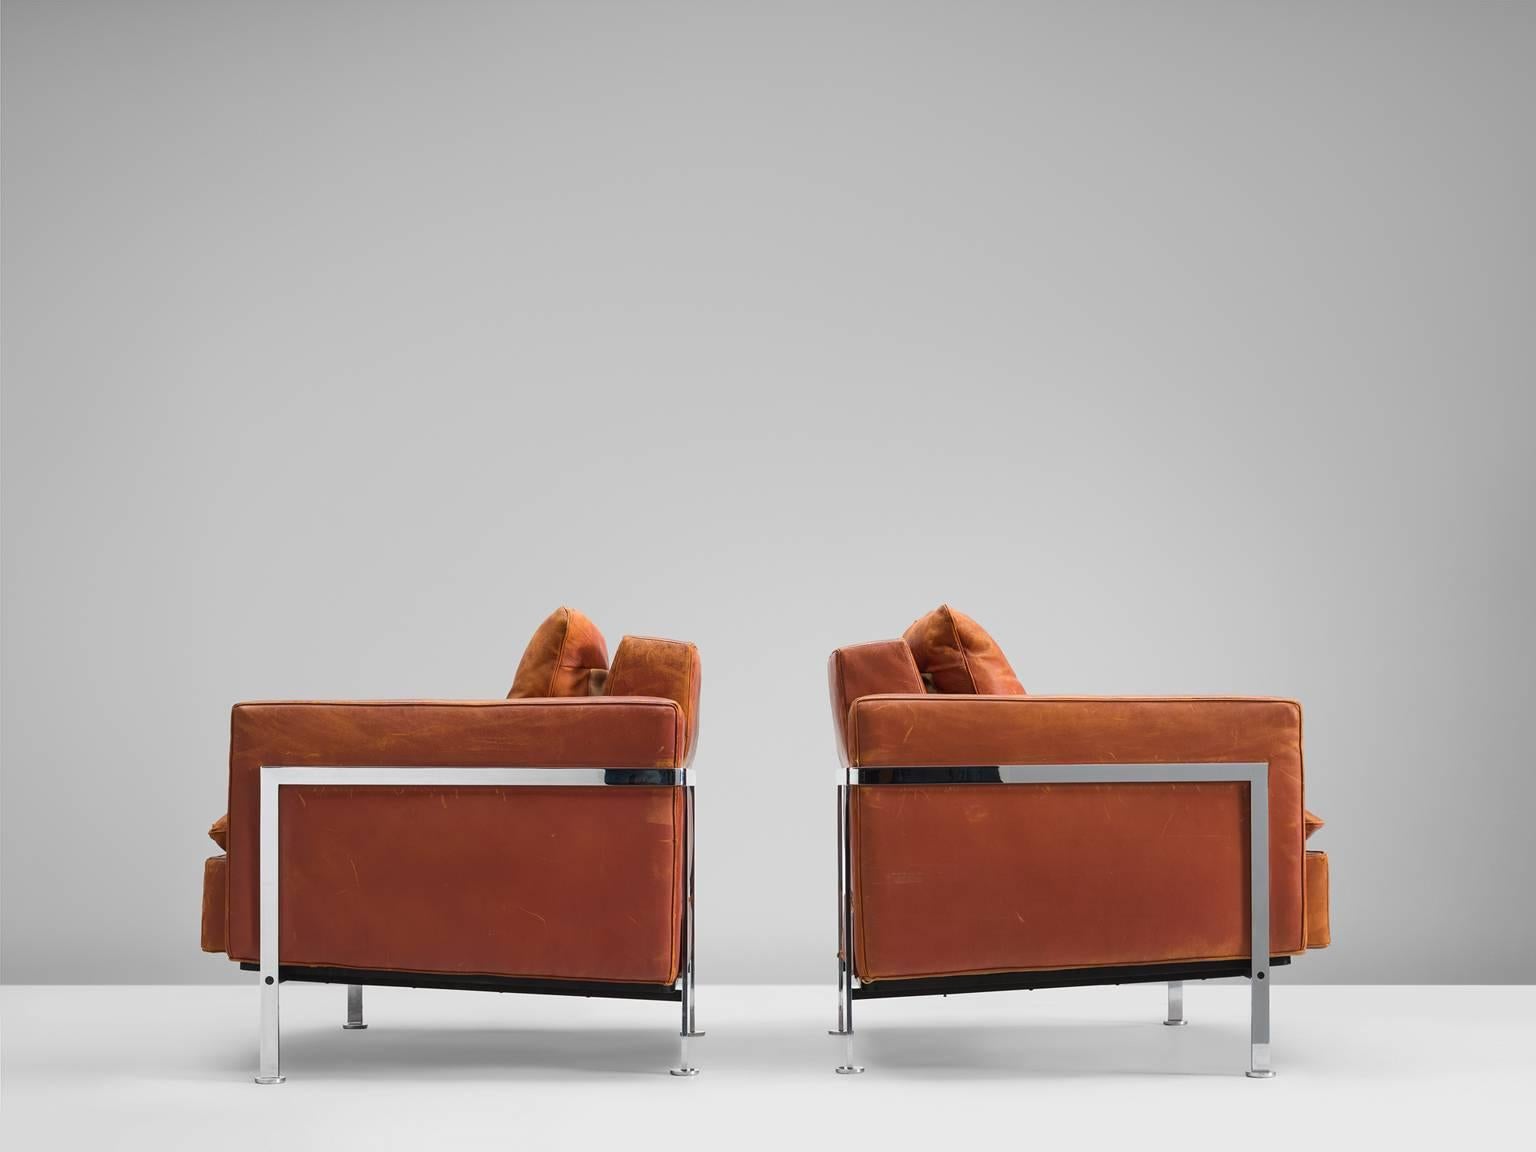 Swiss Robert Hausmann Pair of Cognac Leather Lounge Chairs for Desede Switzerland 1954